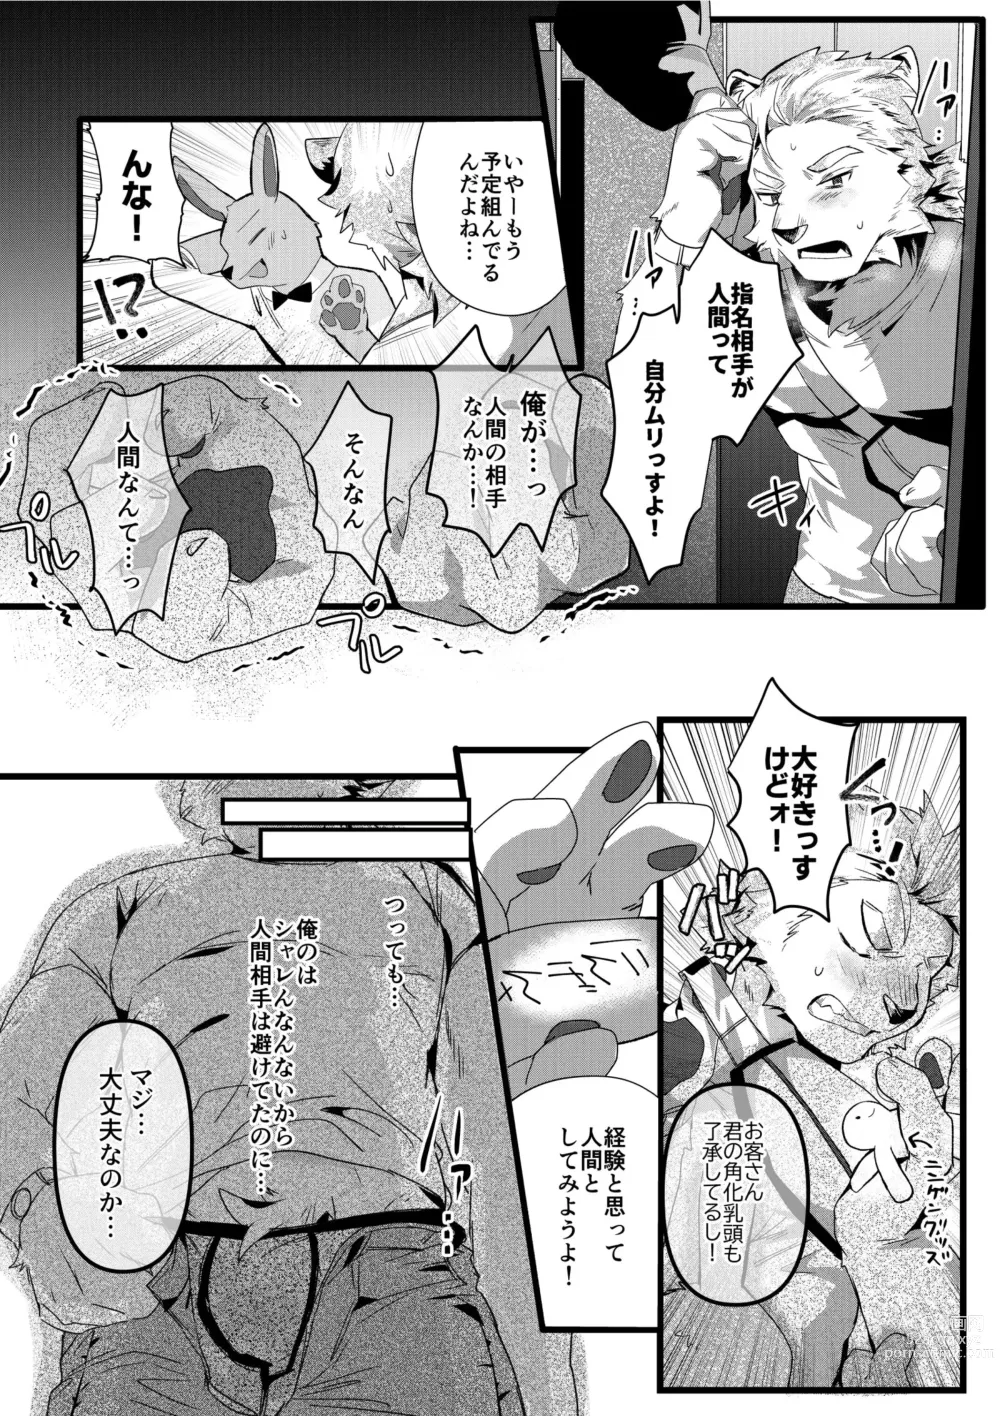 Page 2 of doujinshi Rental Lion to LoveHo